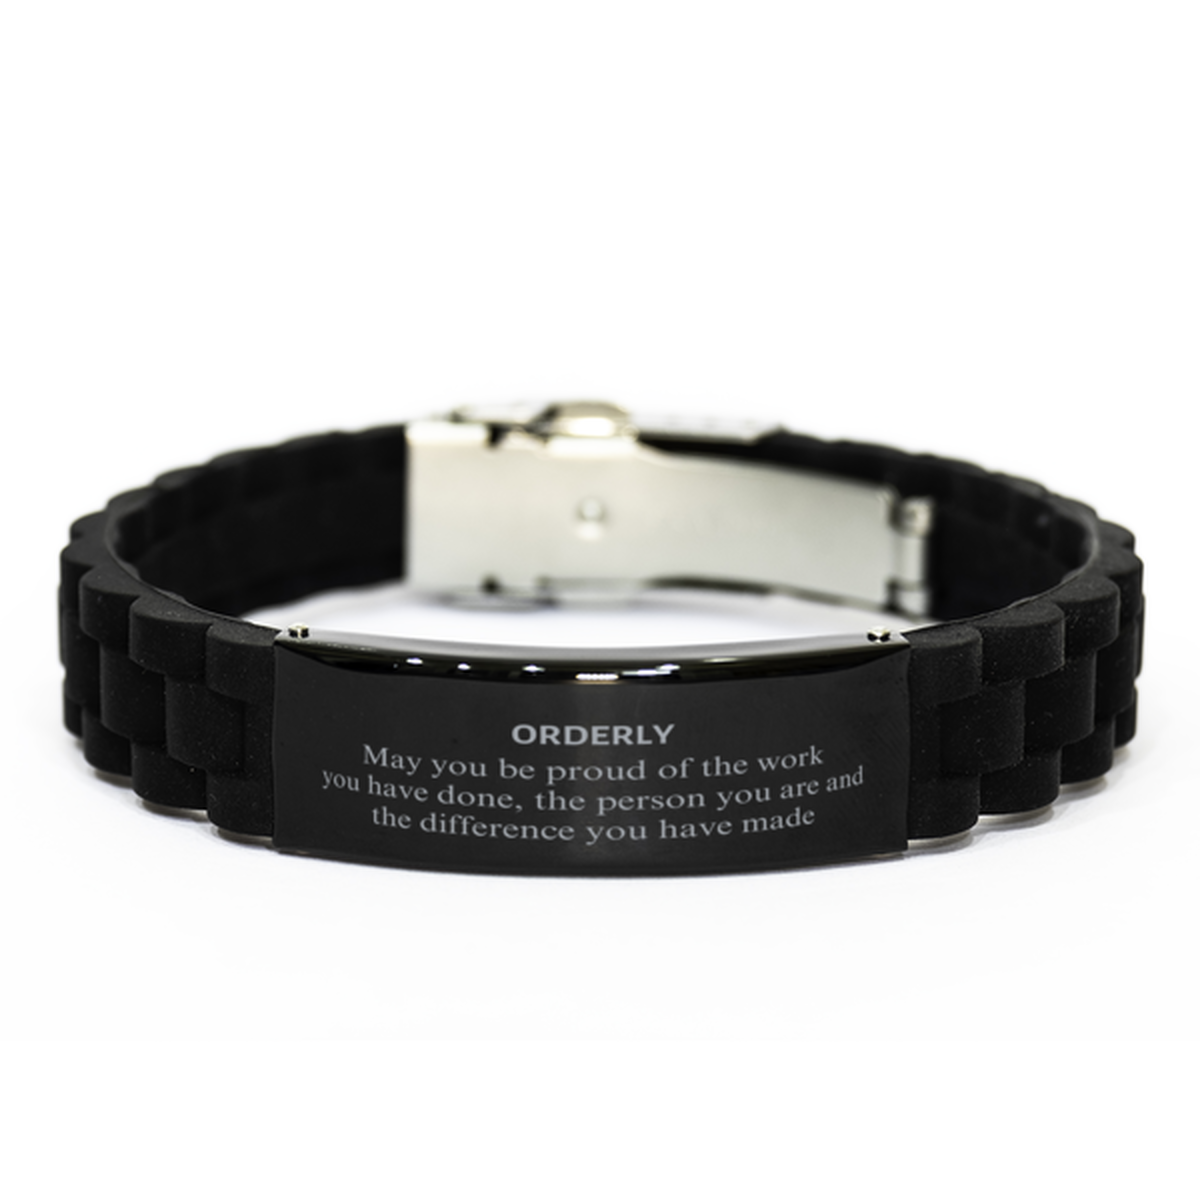 Orderly May you be proud of the work you have done, Retirement Orderly Black Glidelock Clasp Bracelet for Colleague Appreciation Gifts Amazing for Orderly